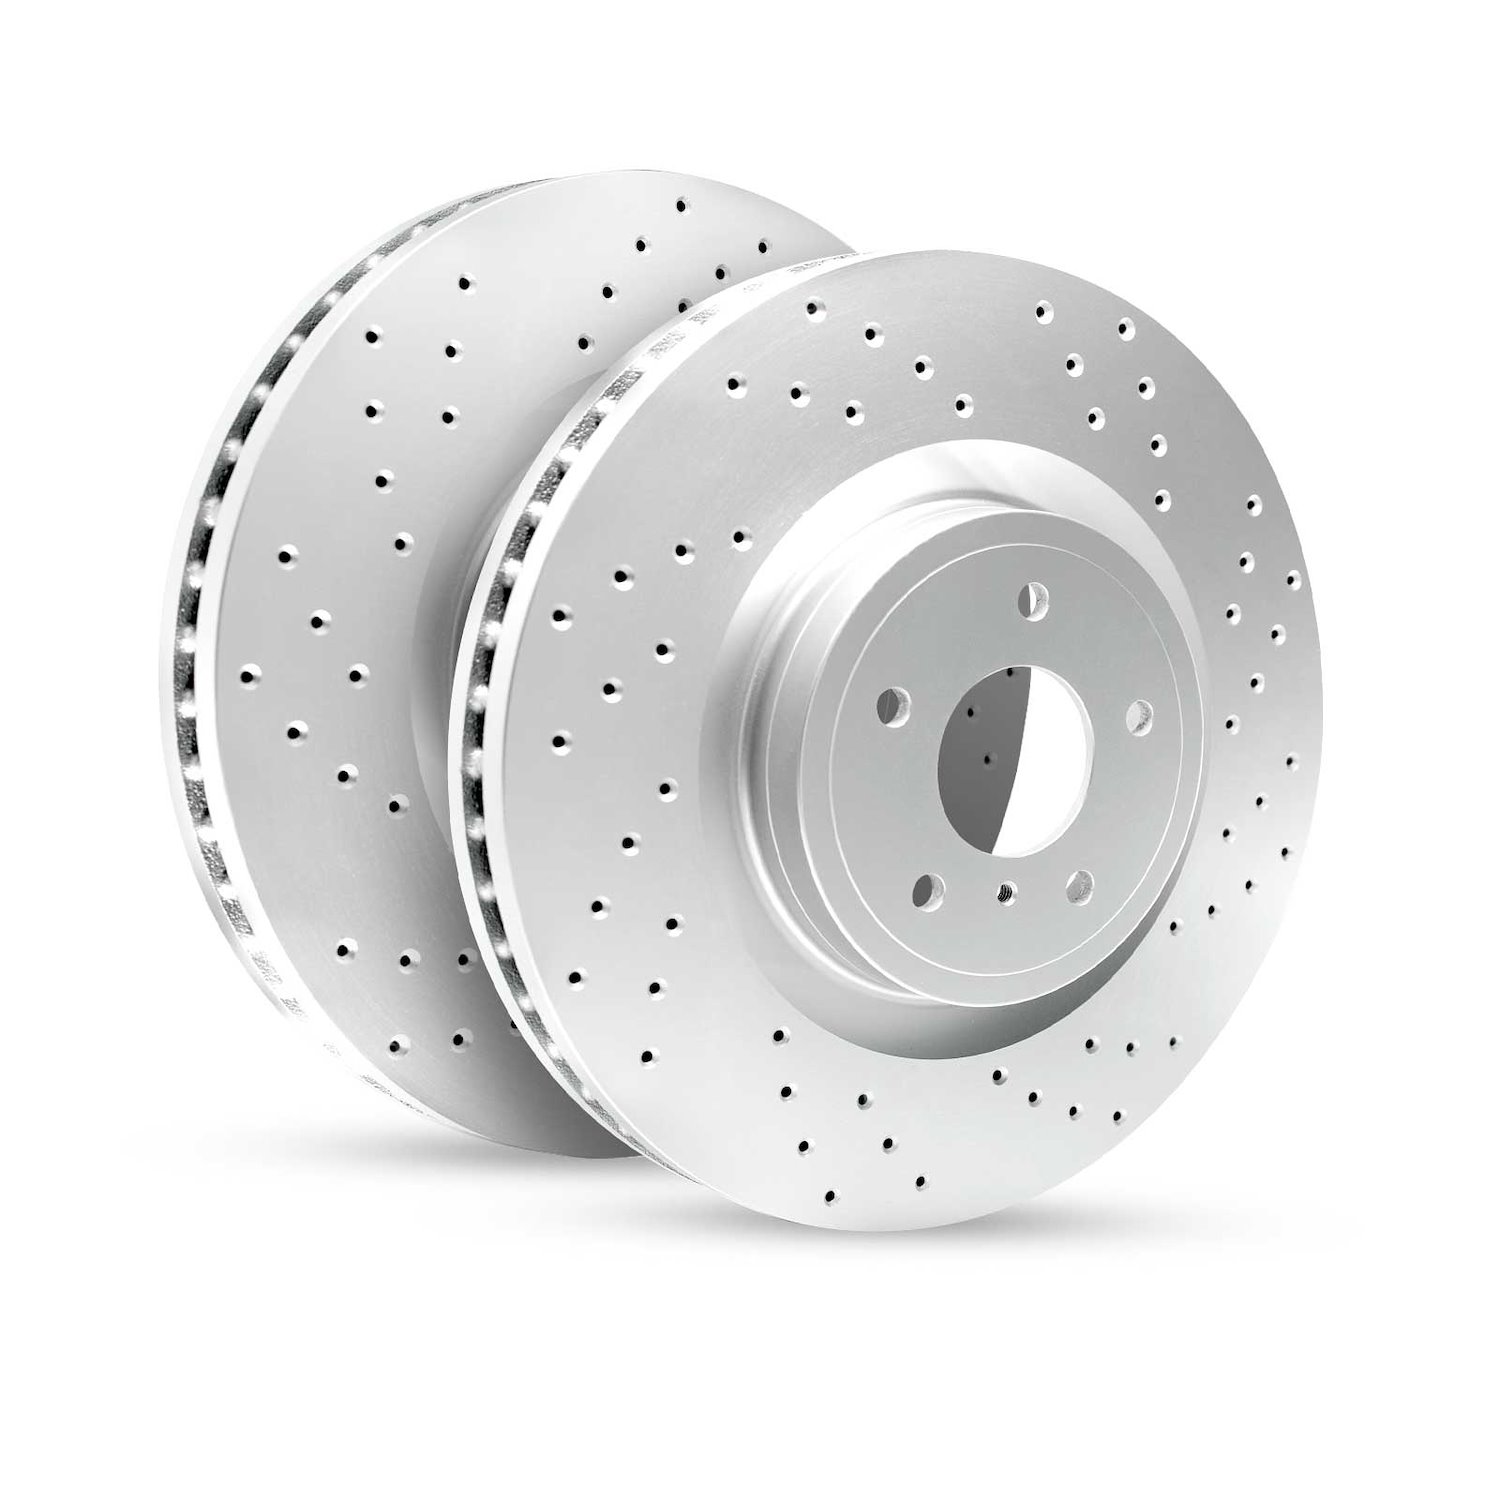 GEO-Carbon Drilled & Slotted Brake Rotor Set, Fits